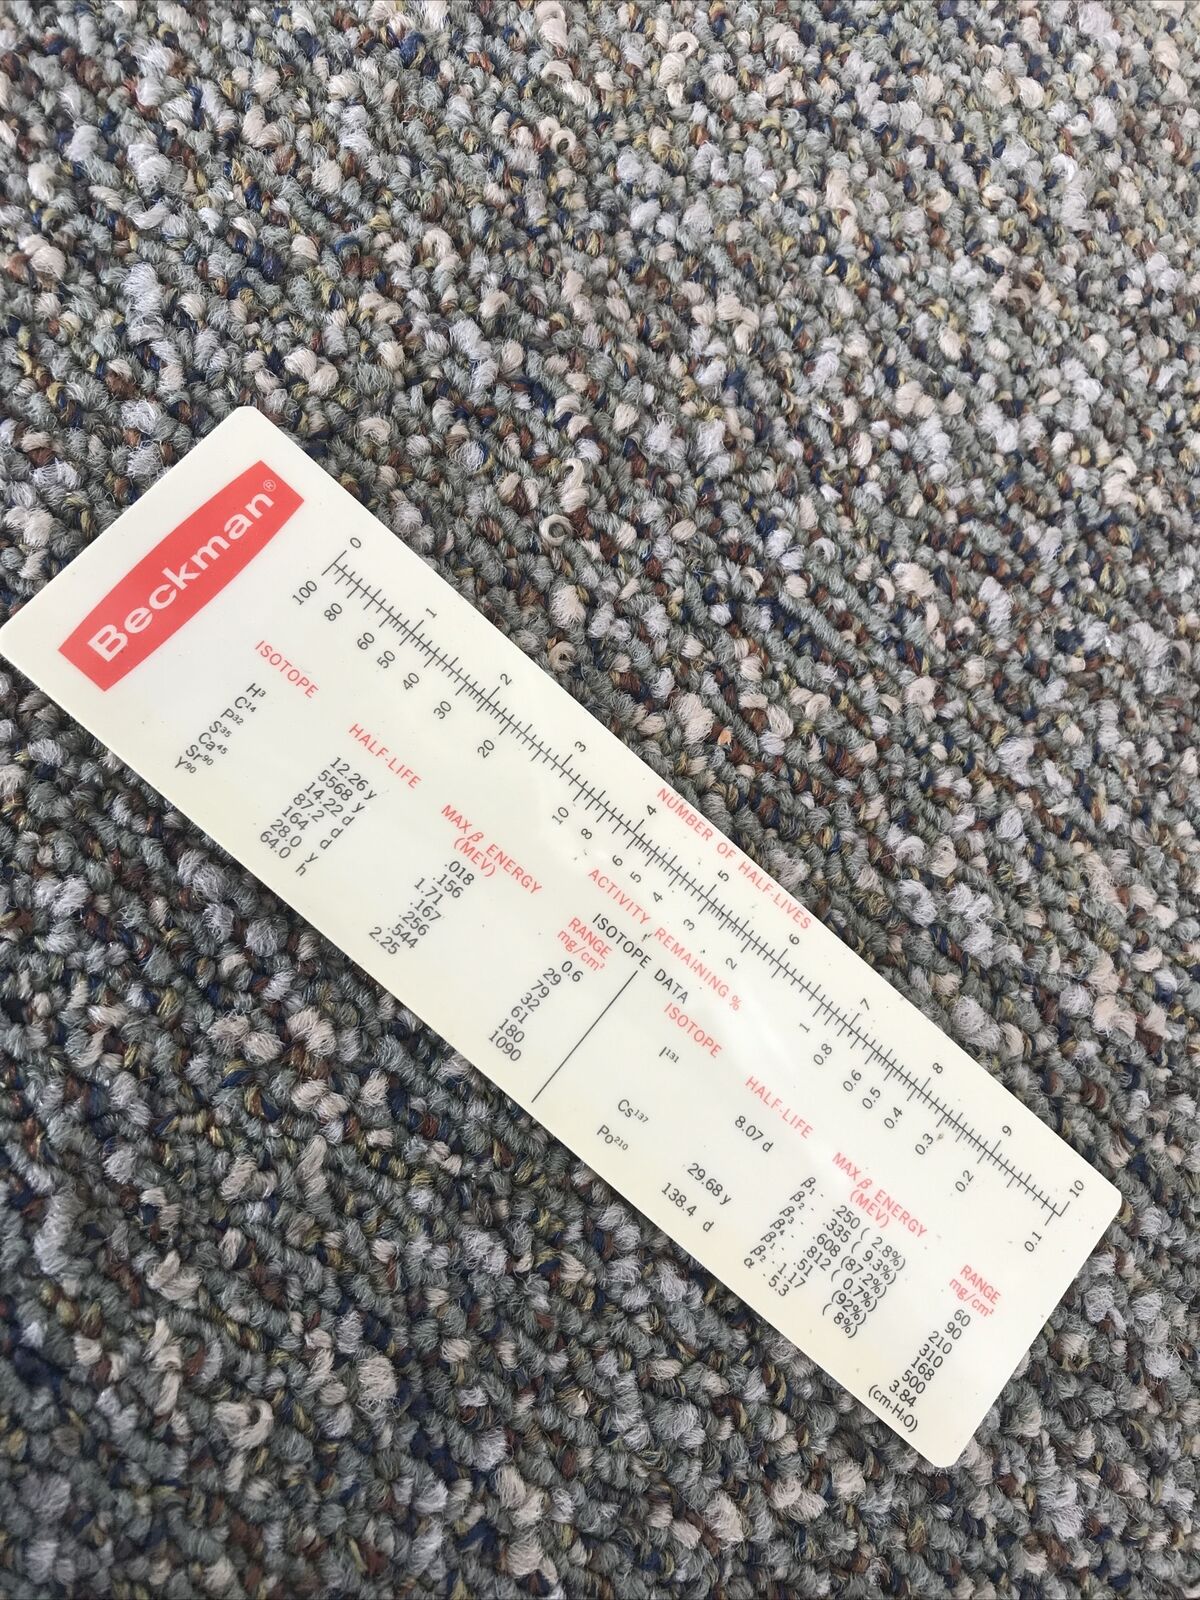 Beckman Scientific Instruments Division~item 60~radioactive decay table ruler